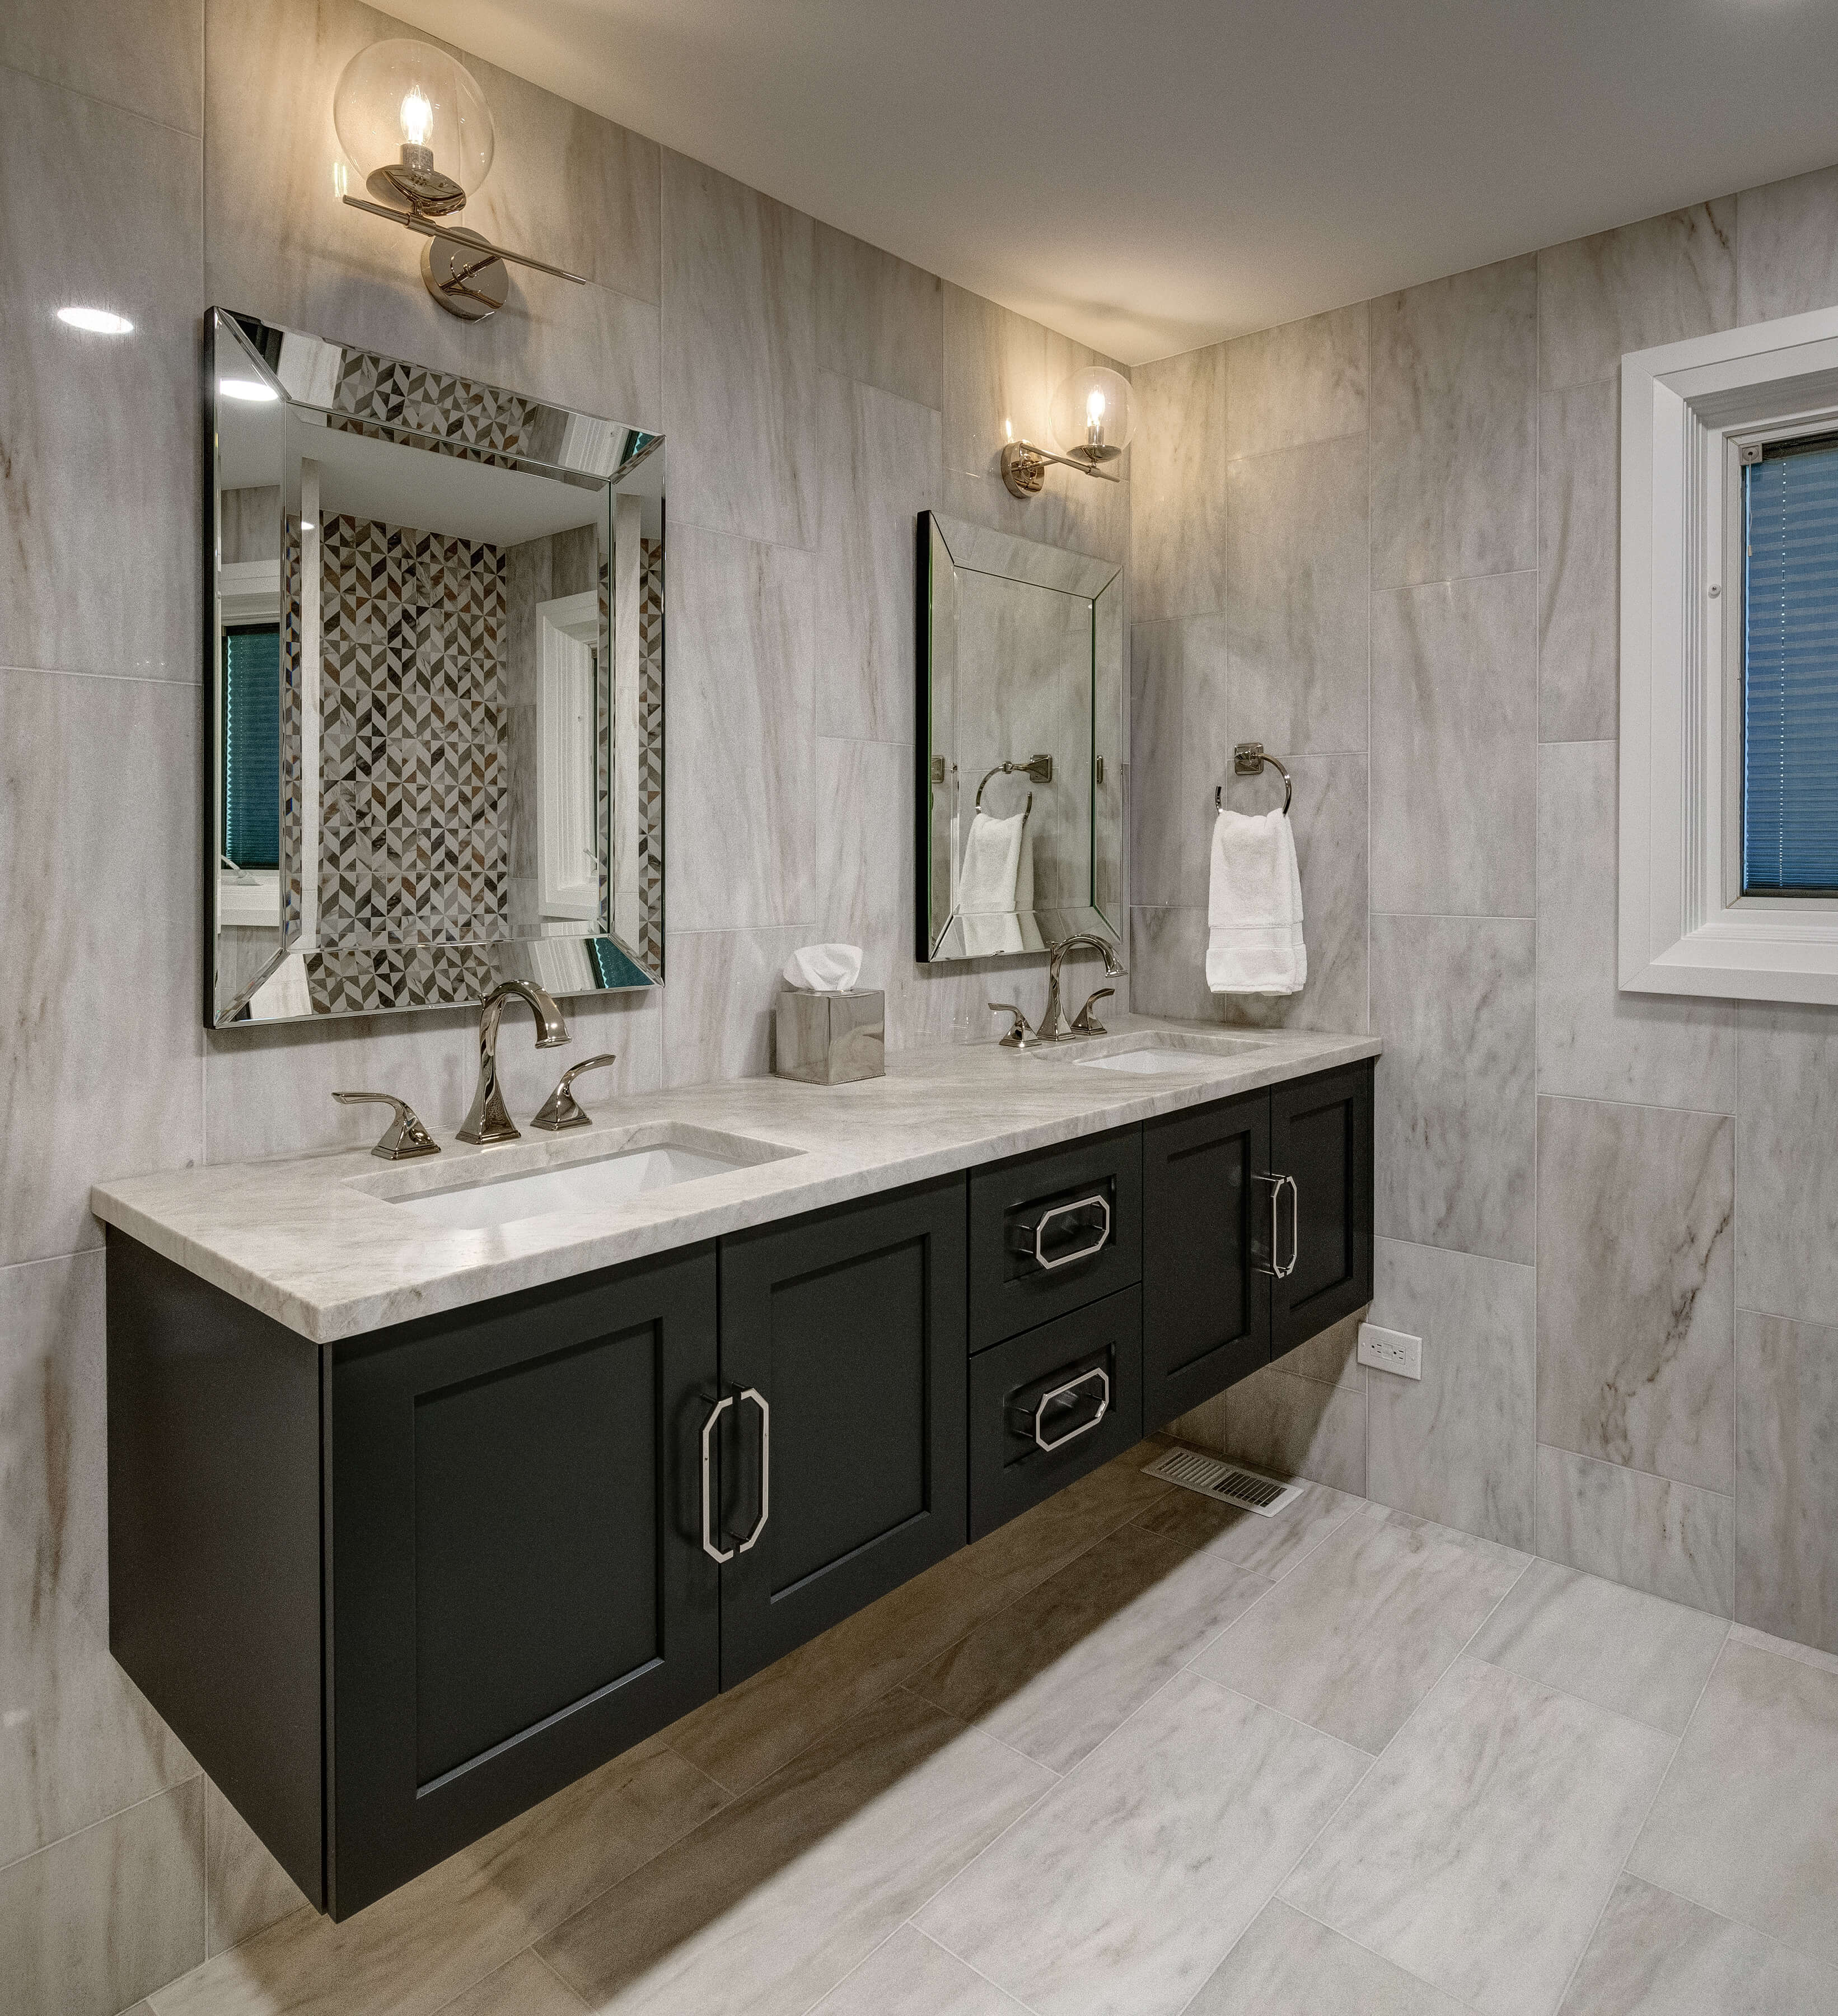 A transitional styled bathroom vanity with flat panel doors in a master bathroom design with a gray color palette.